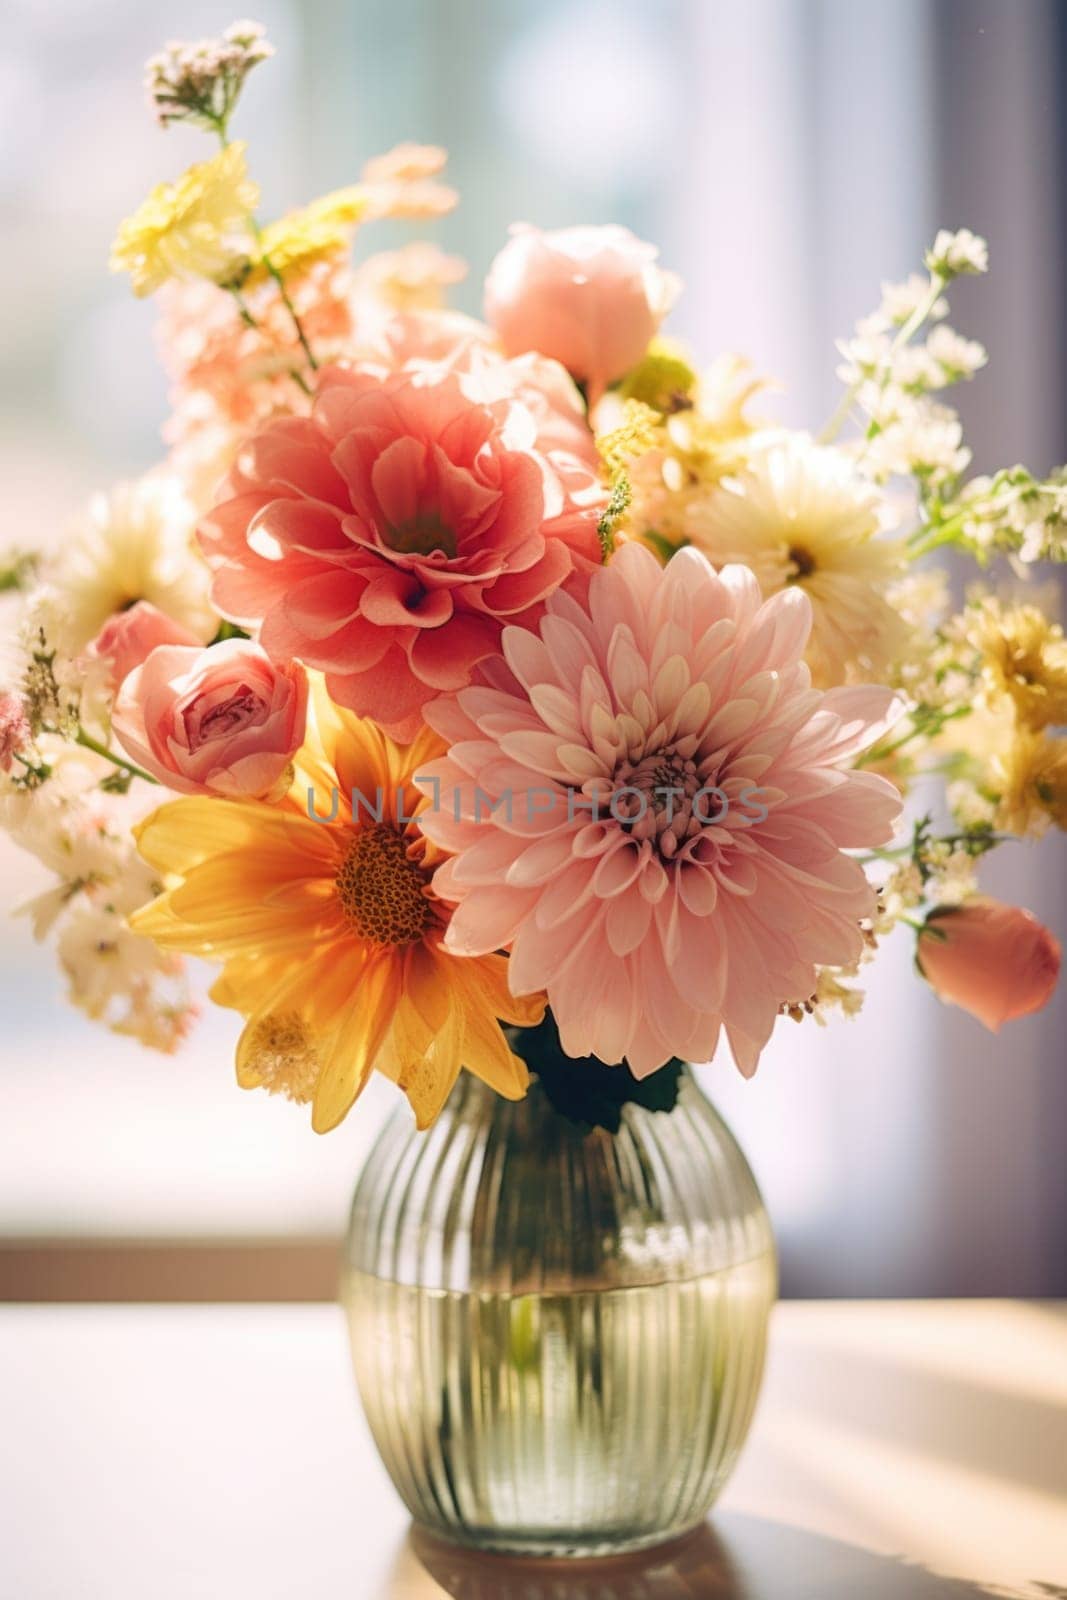 A vase filled with pink and yellow flowers, AI by starush